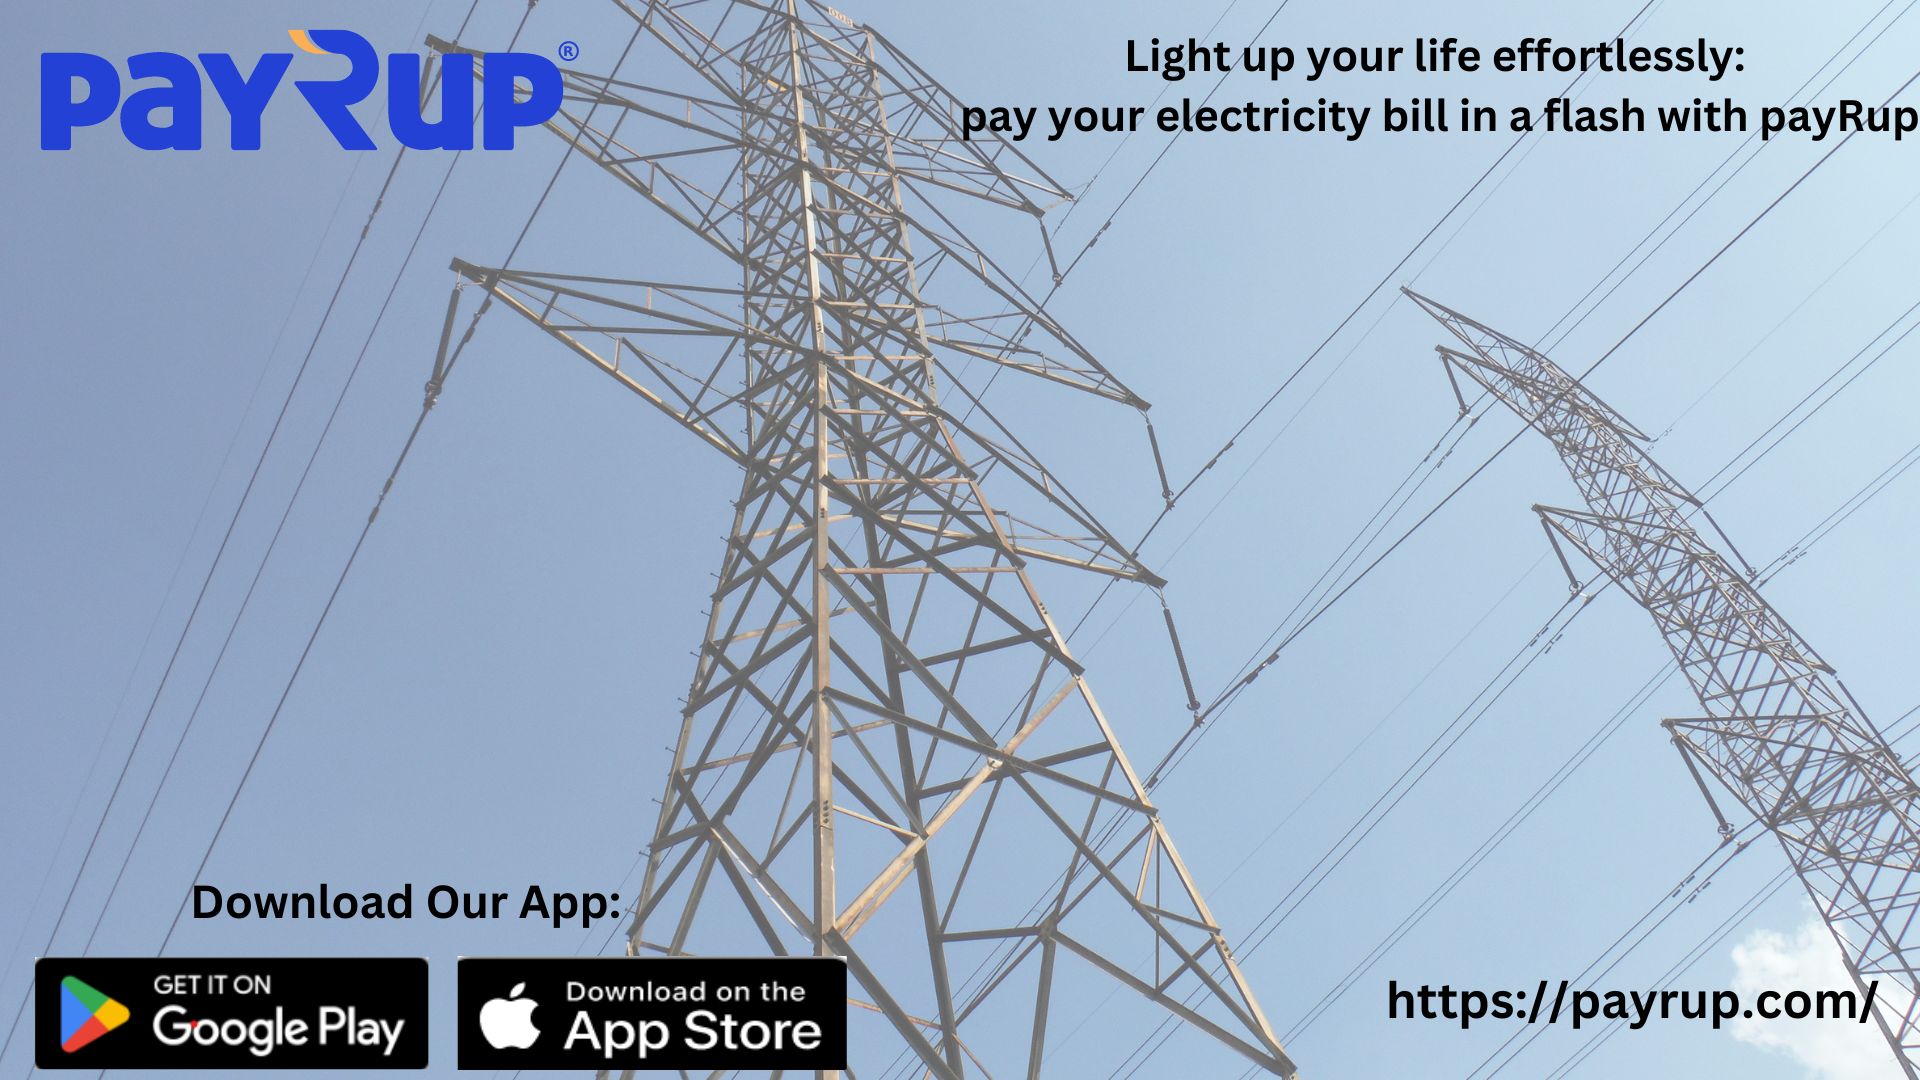 pay your electricity bill with payRup user-friendly platform.